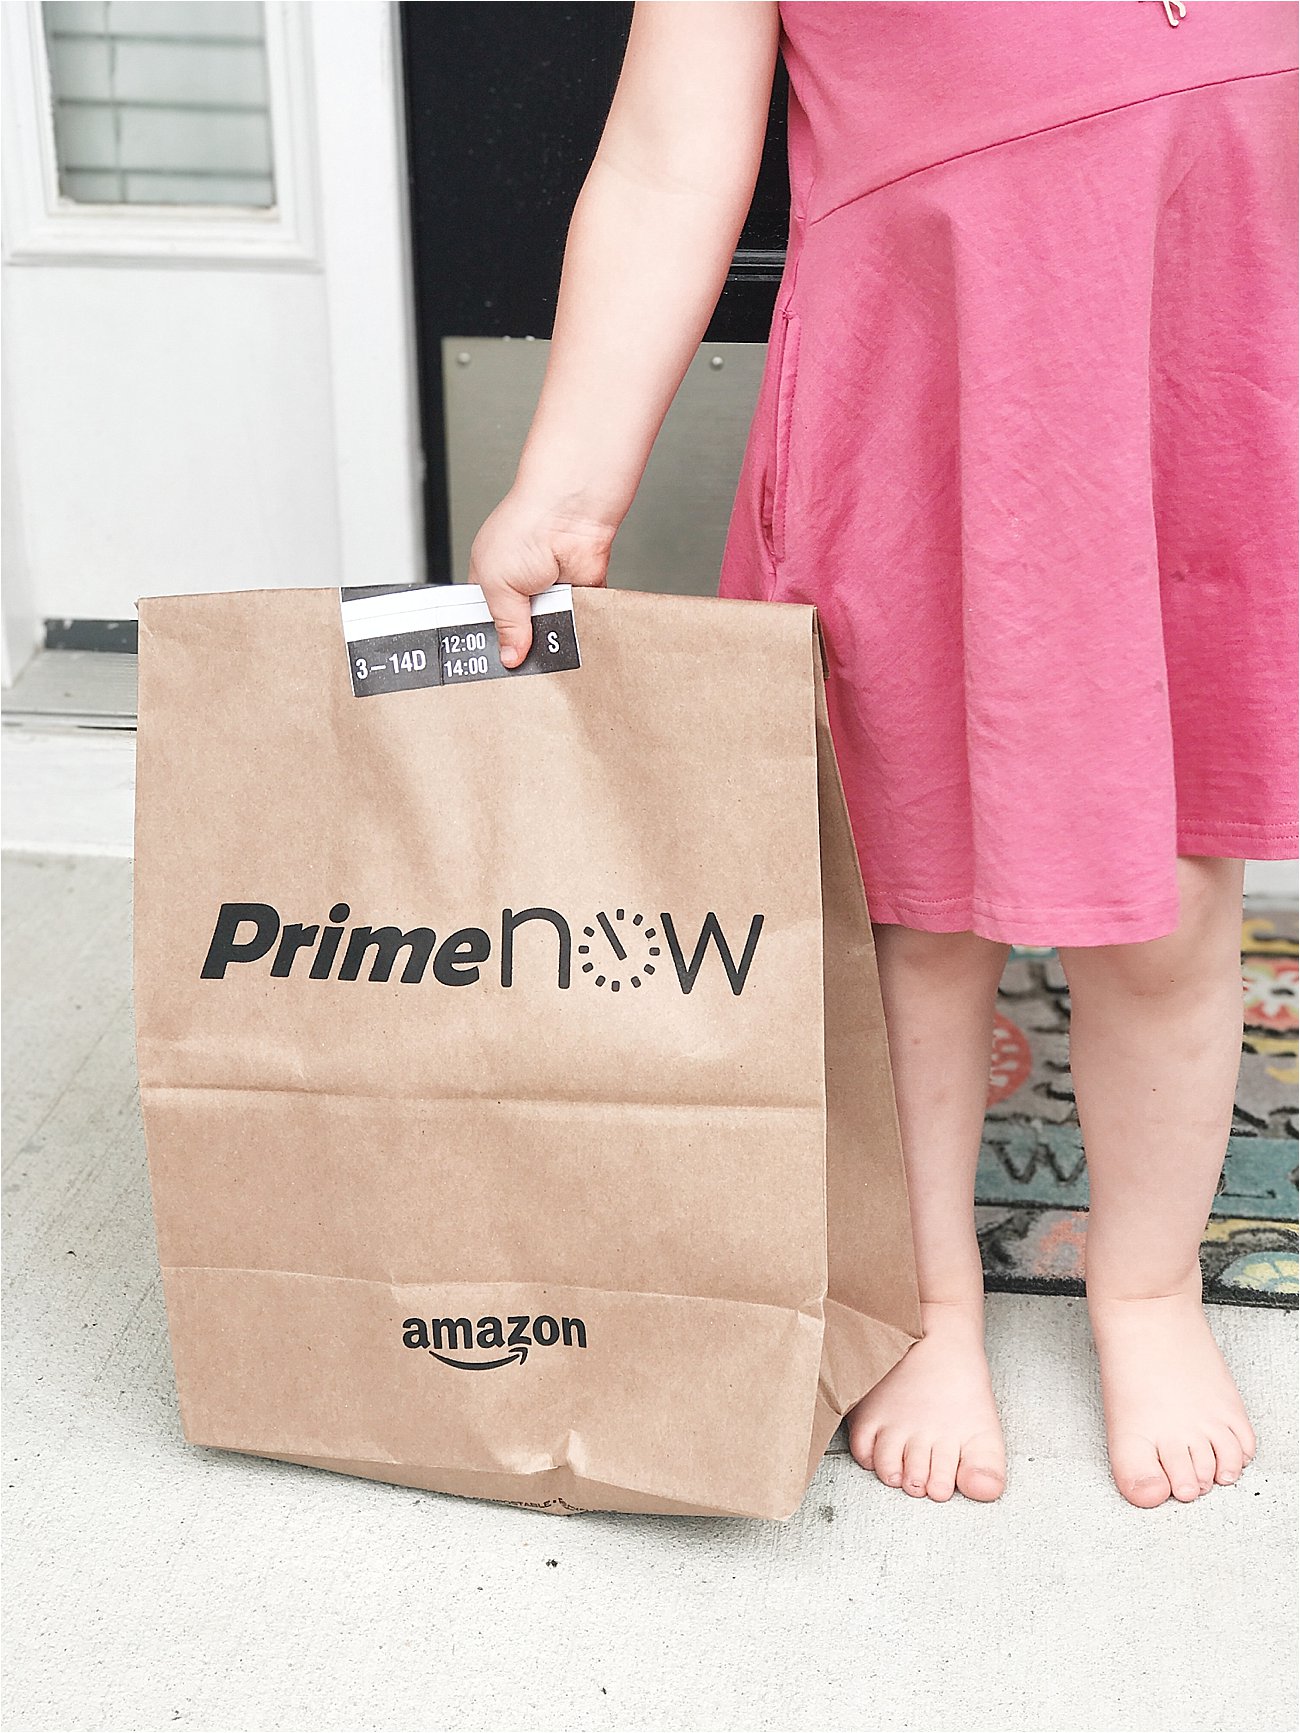 My Amazon Prime Now Review: Why it is the Best by lifestyle blogger Still Being Molly